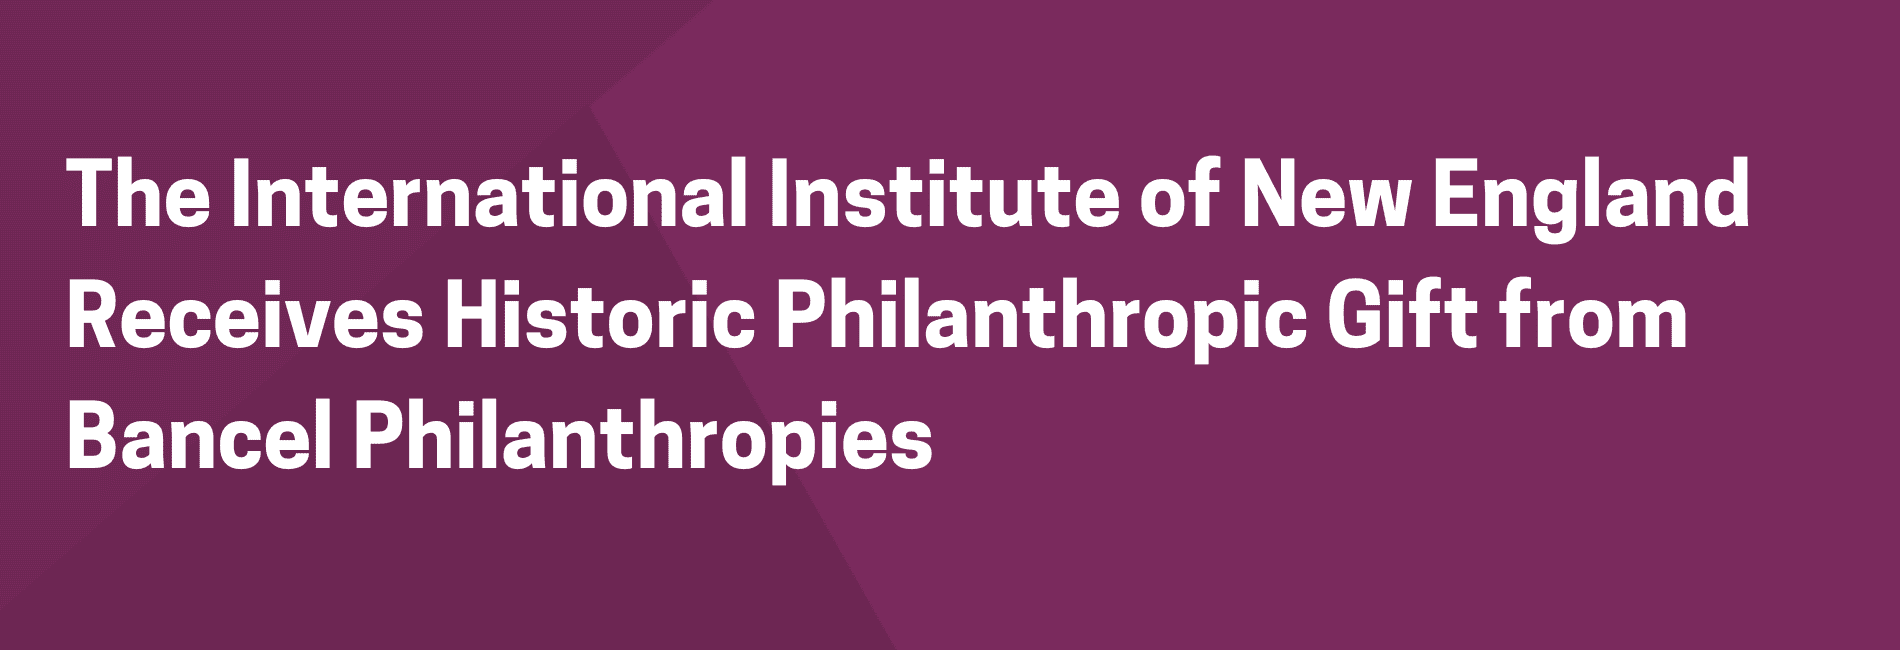 The International Institute of New England Receives Historic Philanthropic Gift from Bancel Philanthropies